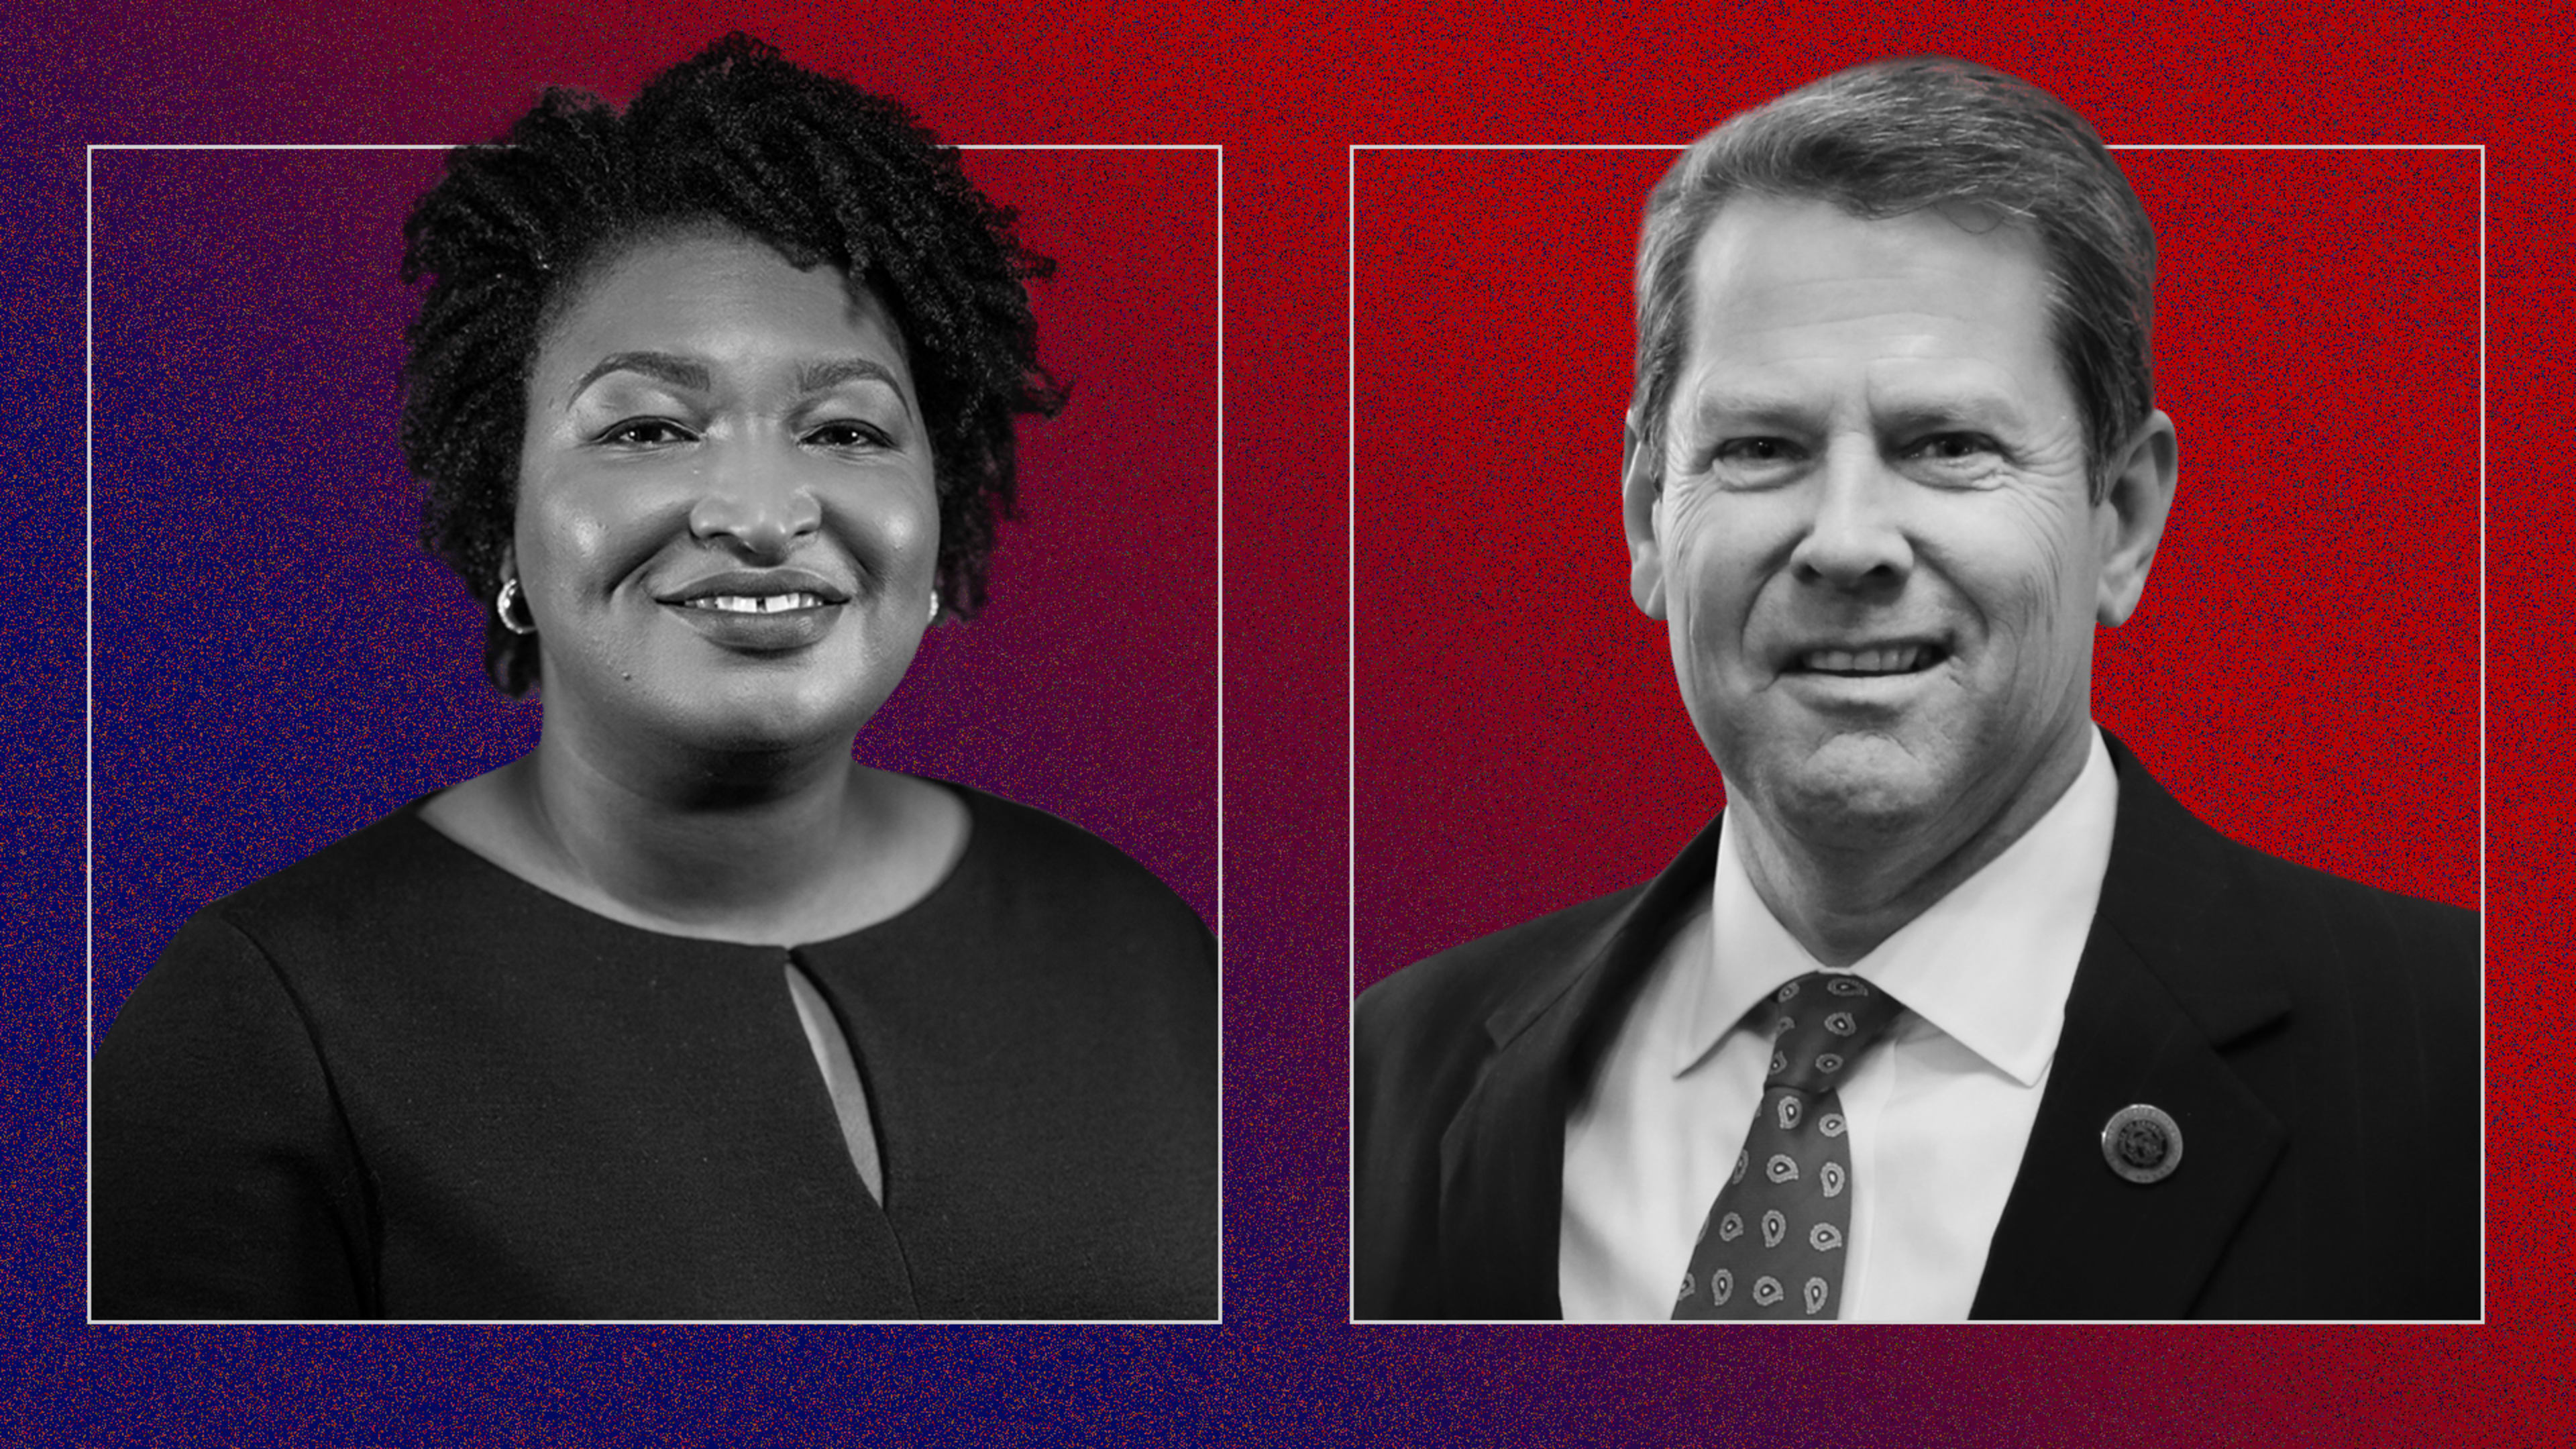 Democrat Stacey Abrams bows out of race for Georgia governor